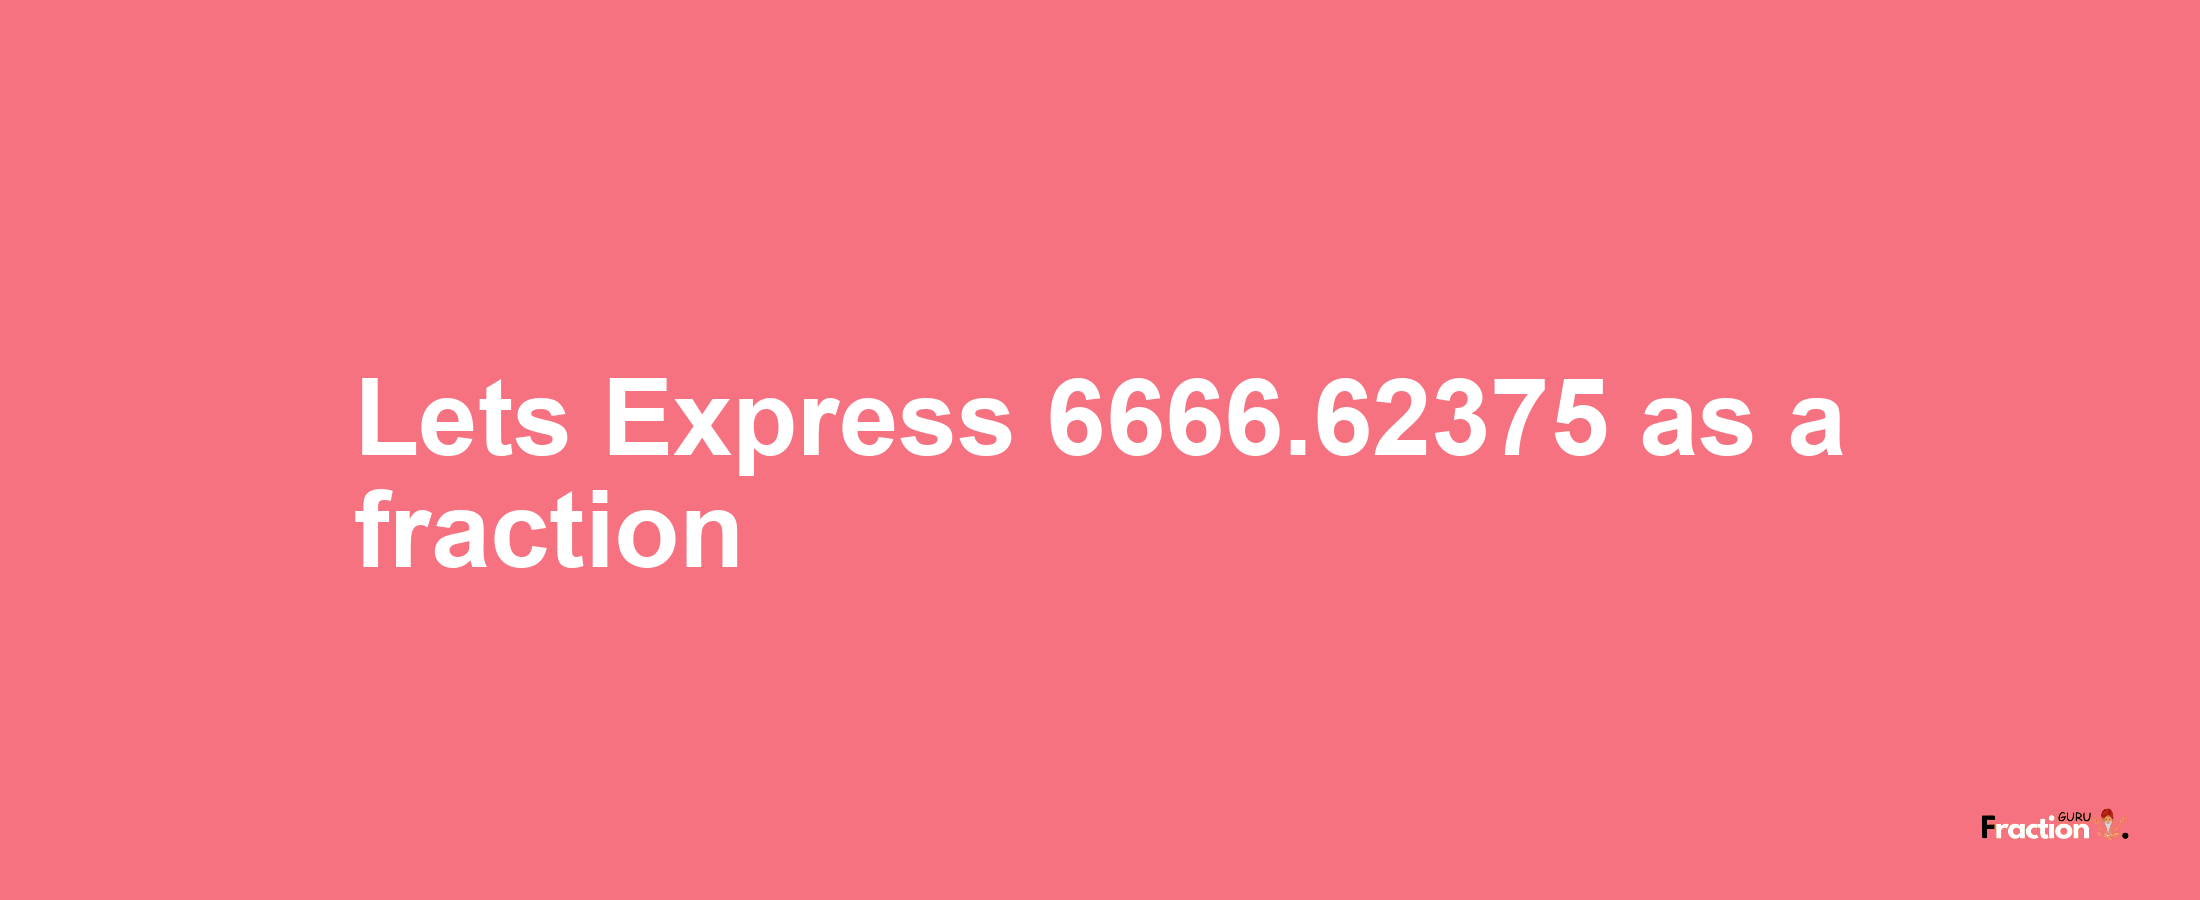 Lets Express 6666.62375 as afraction